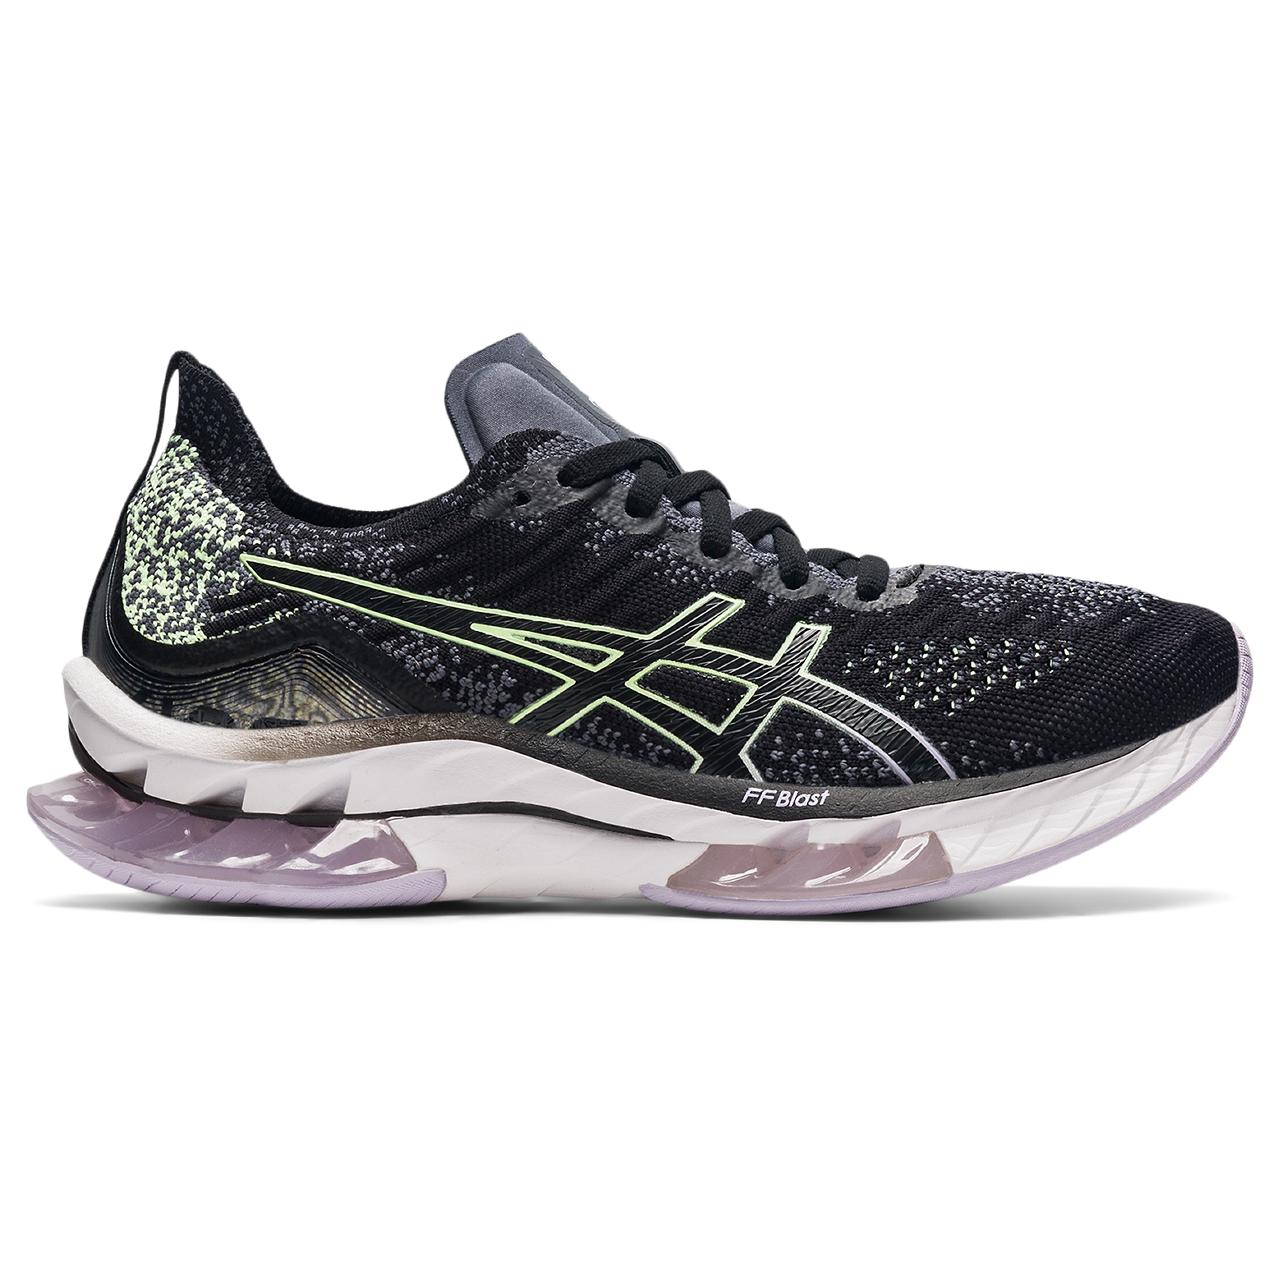 The Women's Kinsei Blast is designed for runners seeking a cushioned and smooth shoe.  The Gel in the heel and forefoot creates lots of cushioning during the landing phase- the shoe then propels you forward into that smooth transition.  ASICS also added a Pebax plate to the midsole that makes for fast transitions and lots of forward momentum. This product is in the color BIY Black / Illuminate Yellow.